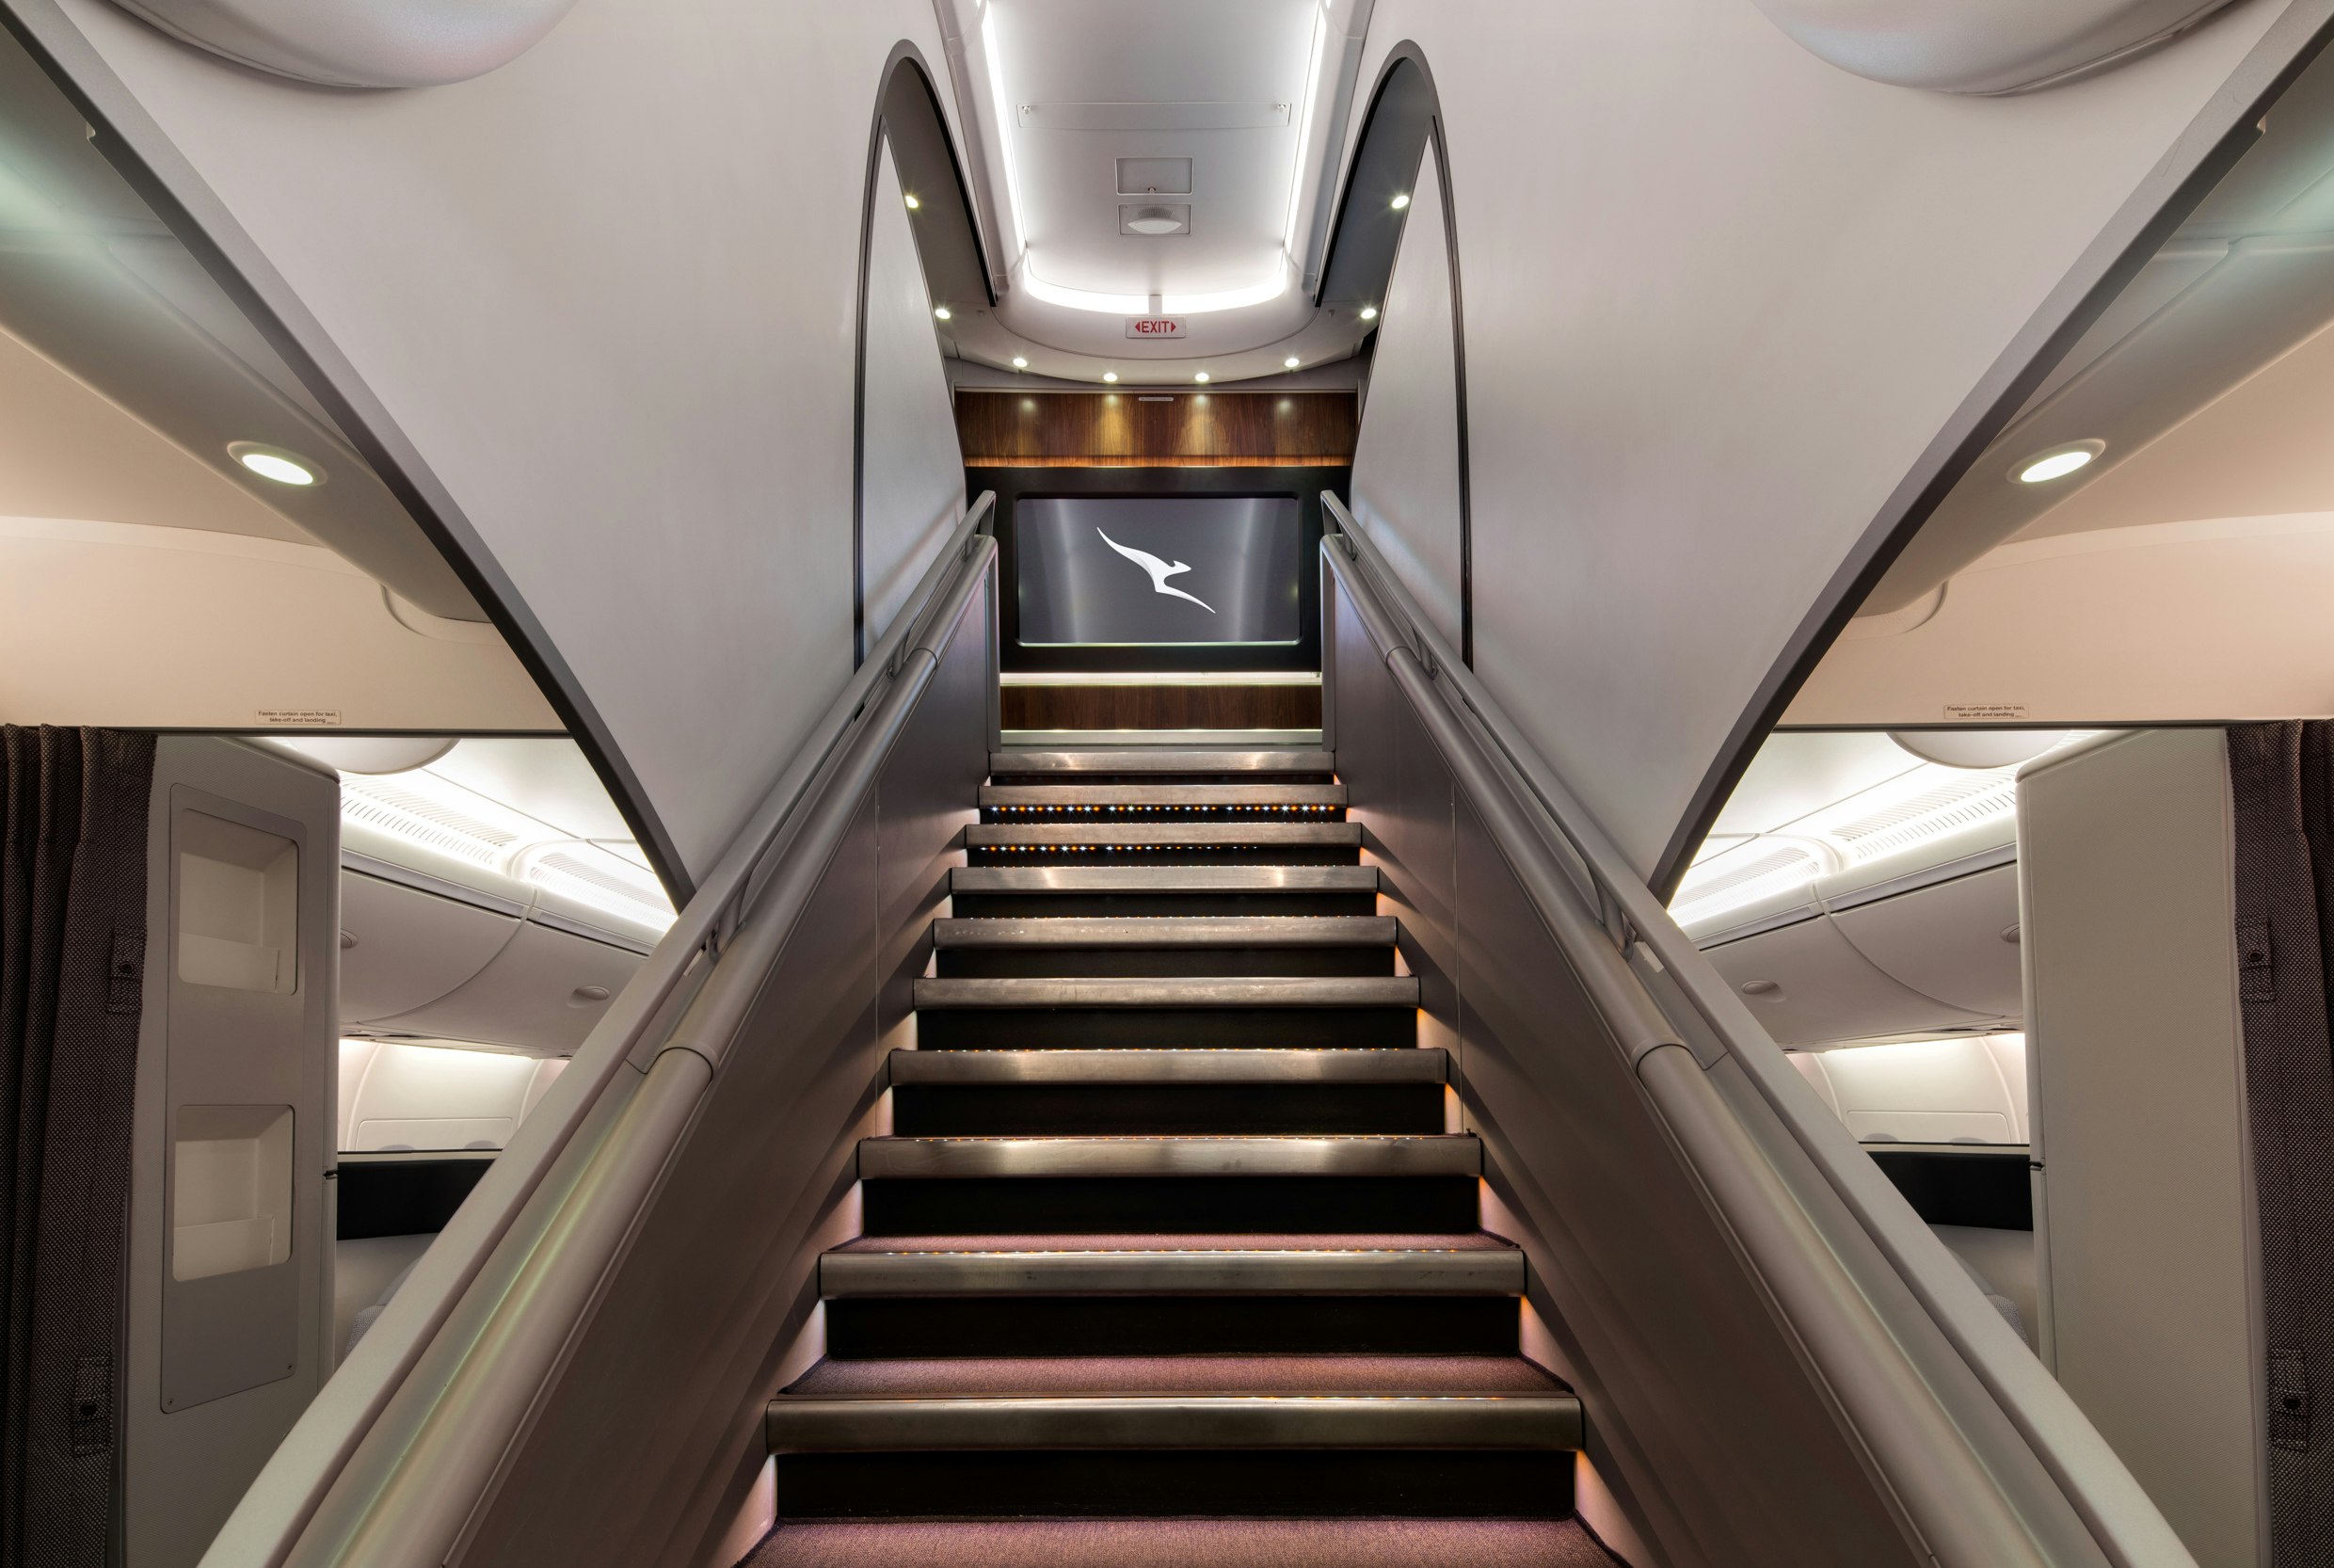 The staircase down to the lower deck on the Qantas A380 